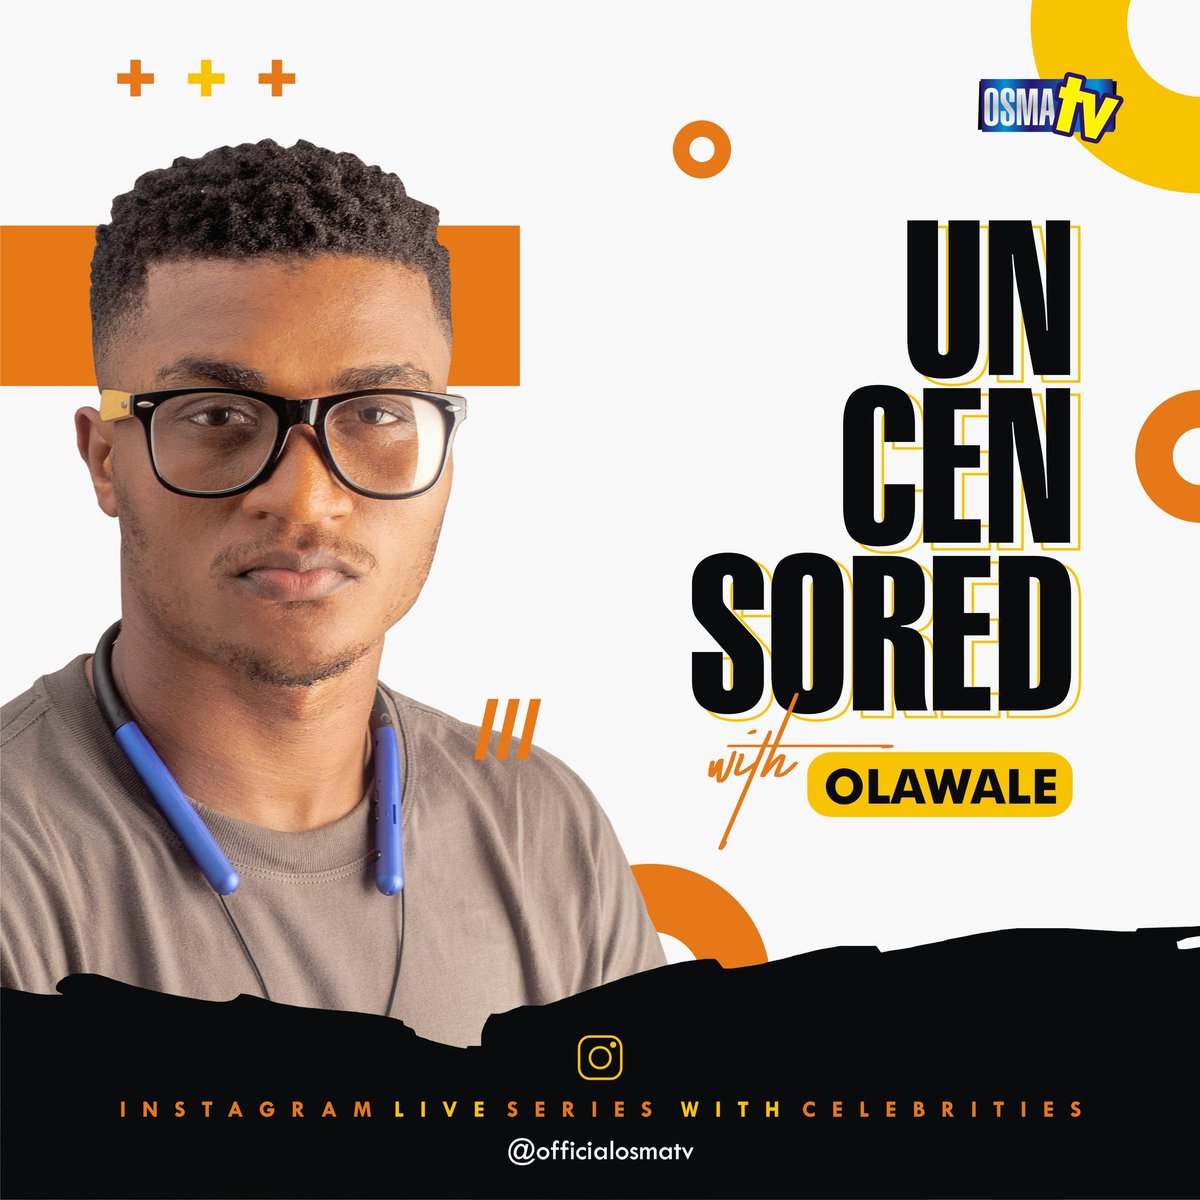 Hello friends,

The OSMAtv 's Instagram live series themed UNCENSORED will be hitting your airways soon, bigger and better!!!

Fresh contents of this series will be hosted by @Iam_erudite and will be focusing on bringing to light genuine conversations with public figures,